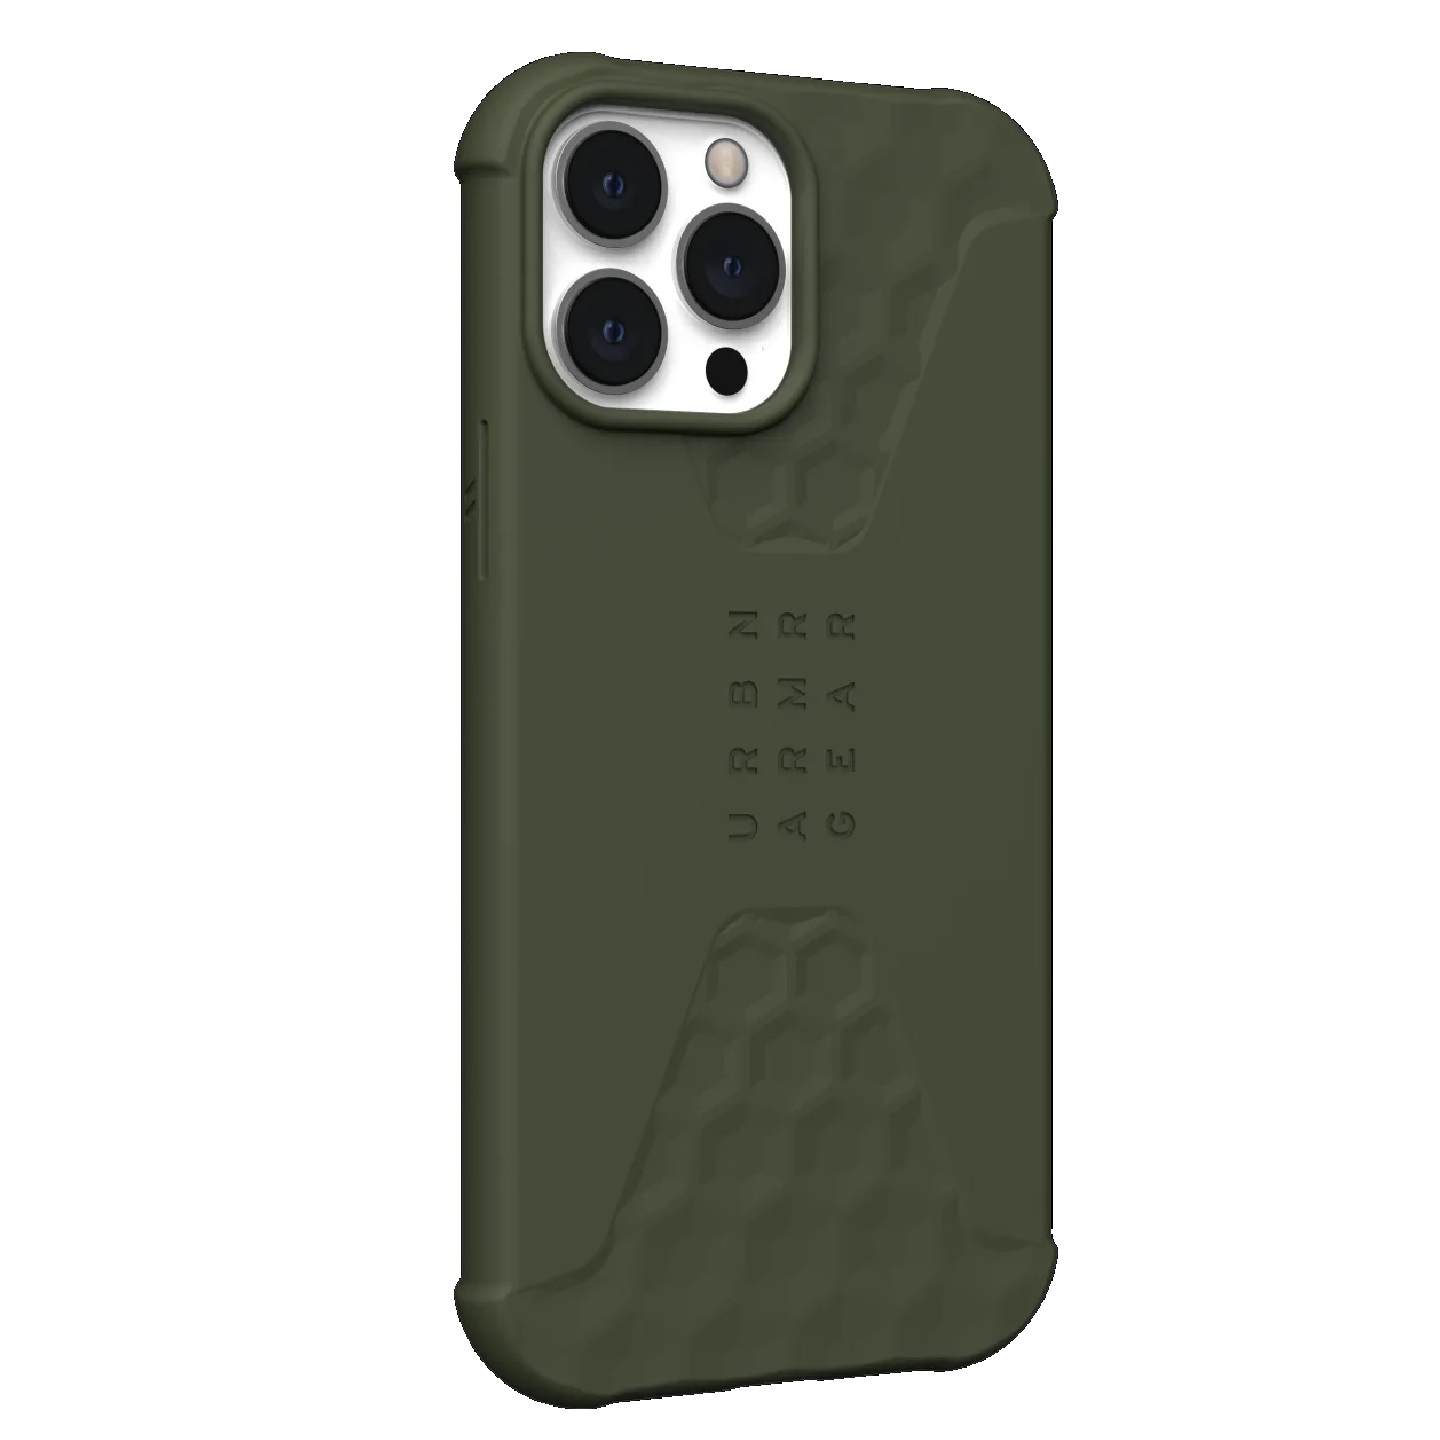 UAG Standard Issue Apple iPhone 13 Pro Max Case – Olive (11316K117272), 16ft. Drop Protection (4.8M), Reinforced Corner Bumpers, shock protection